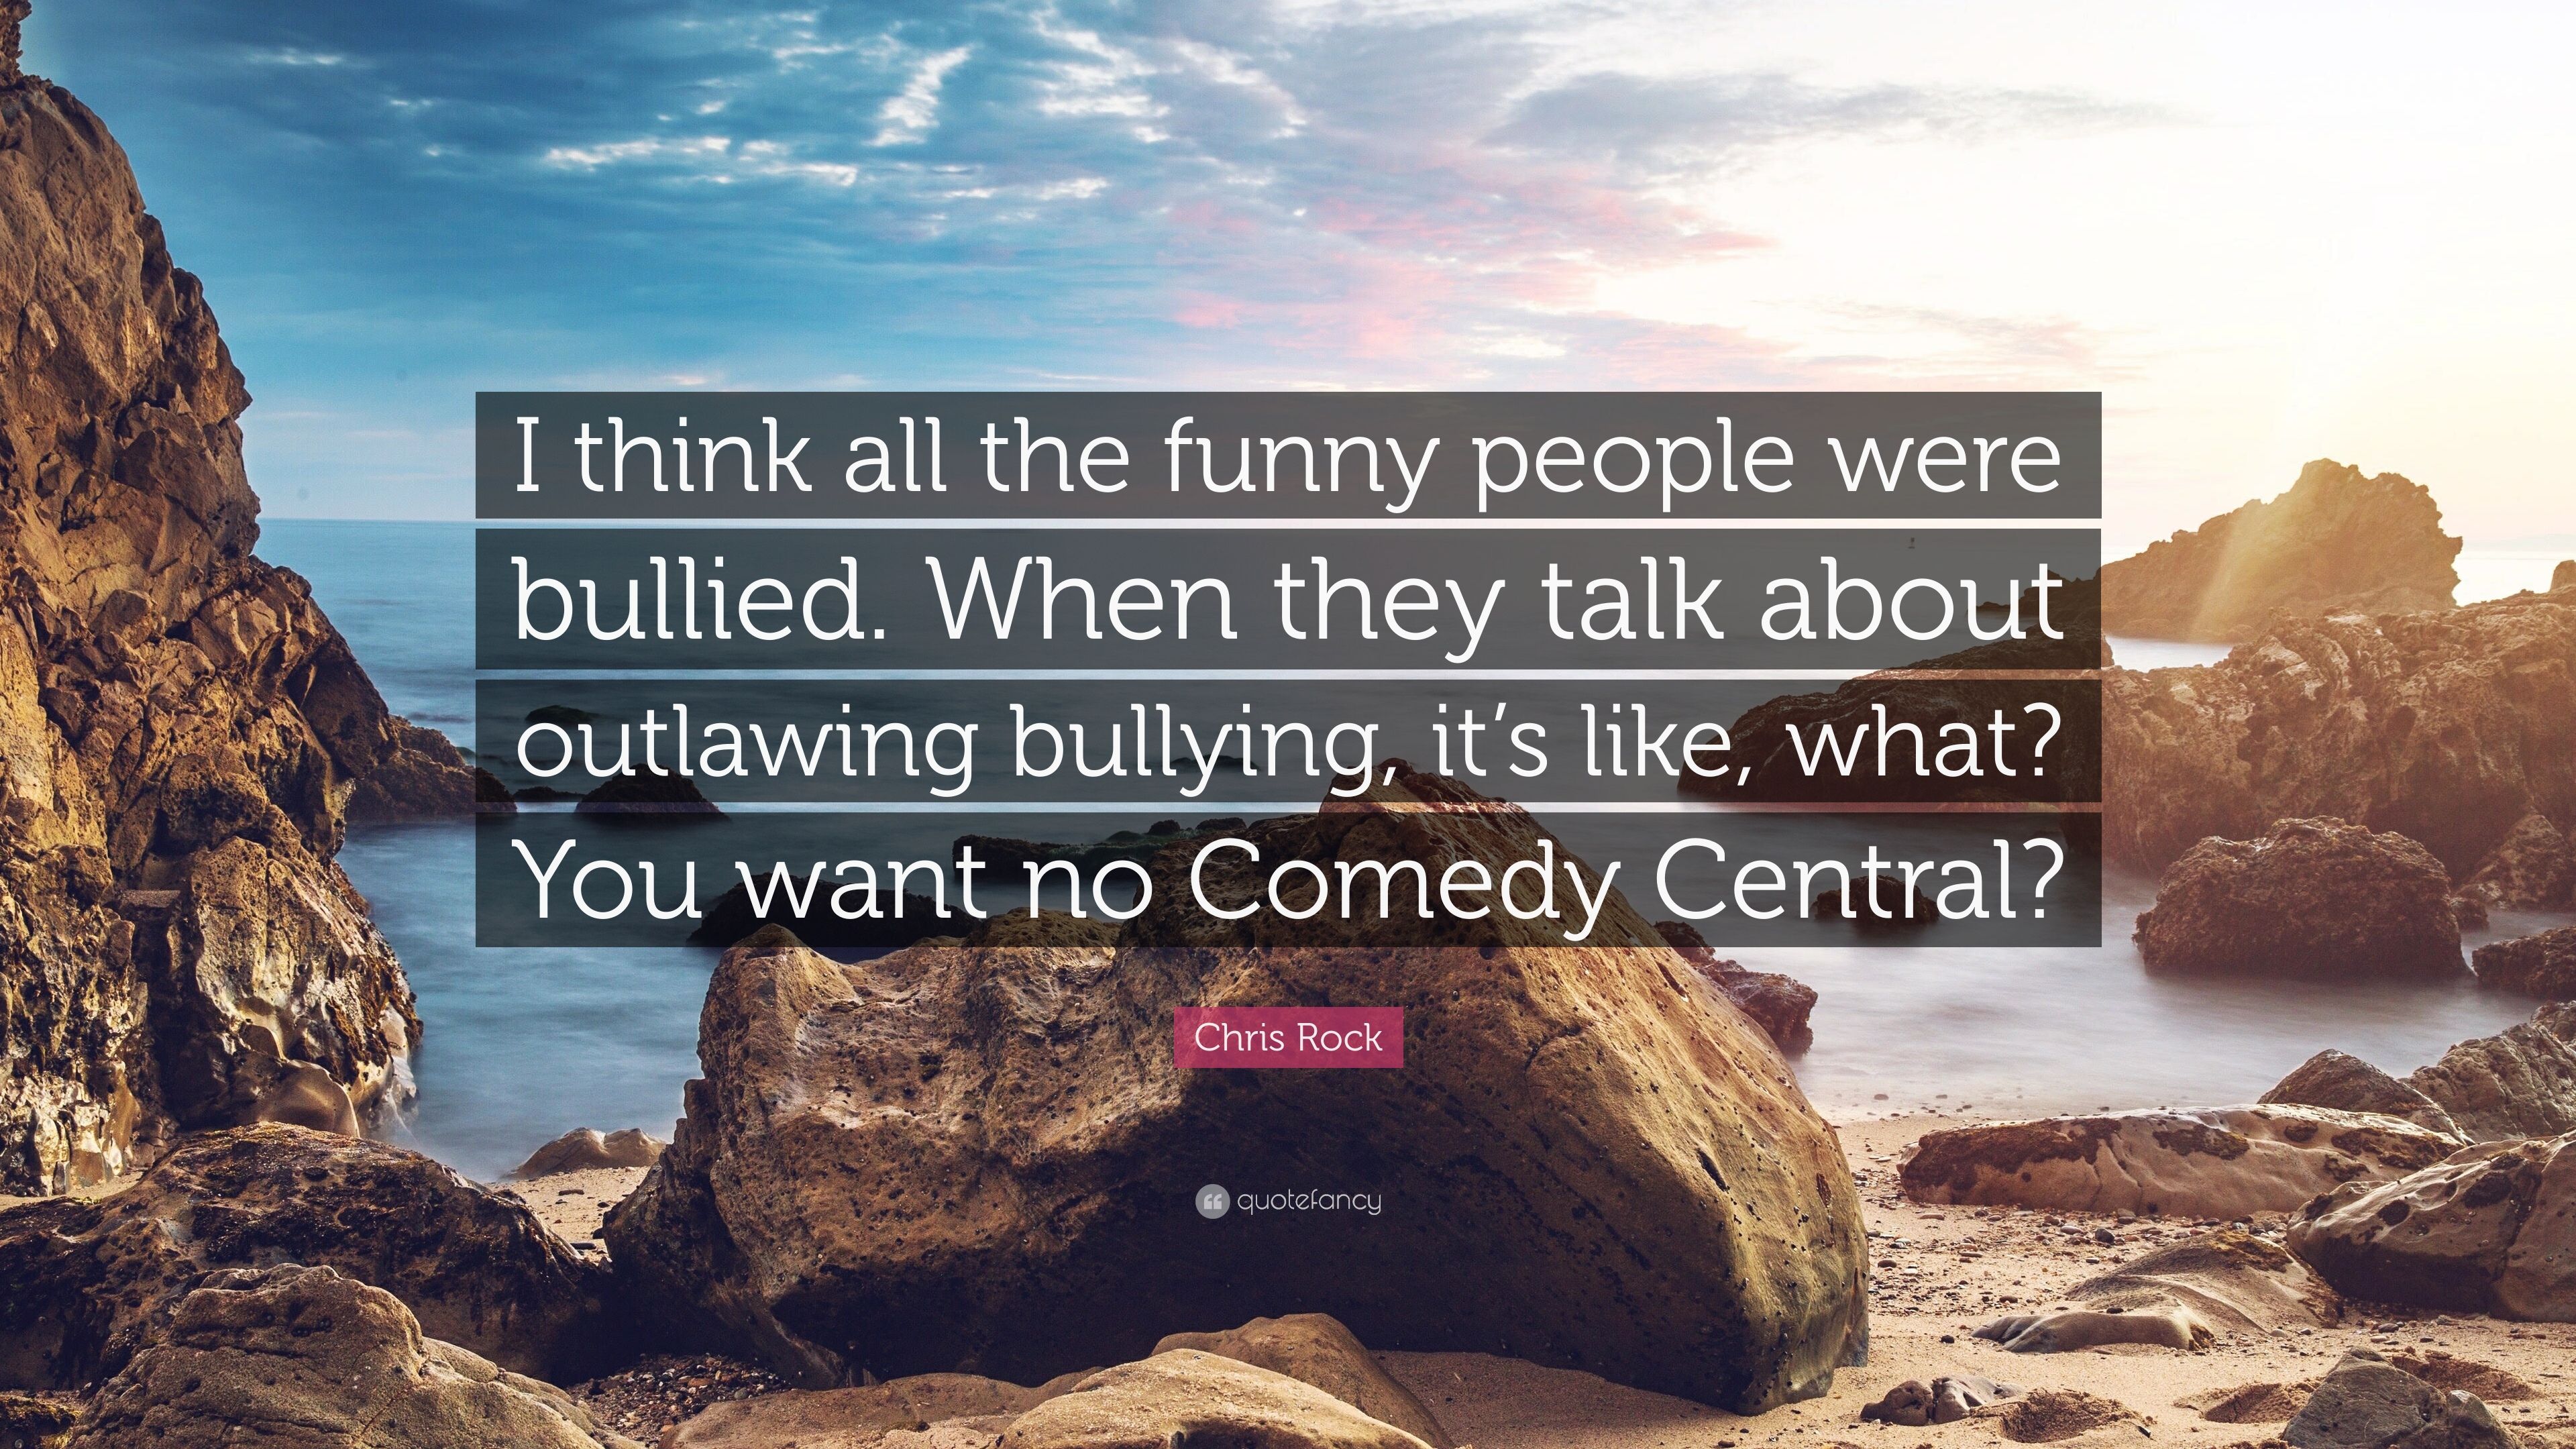 Chris Rock Quote: “I think all the funny people were bullied. When